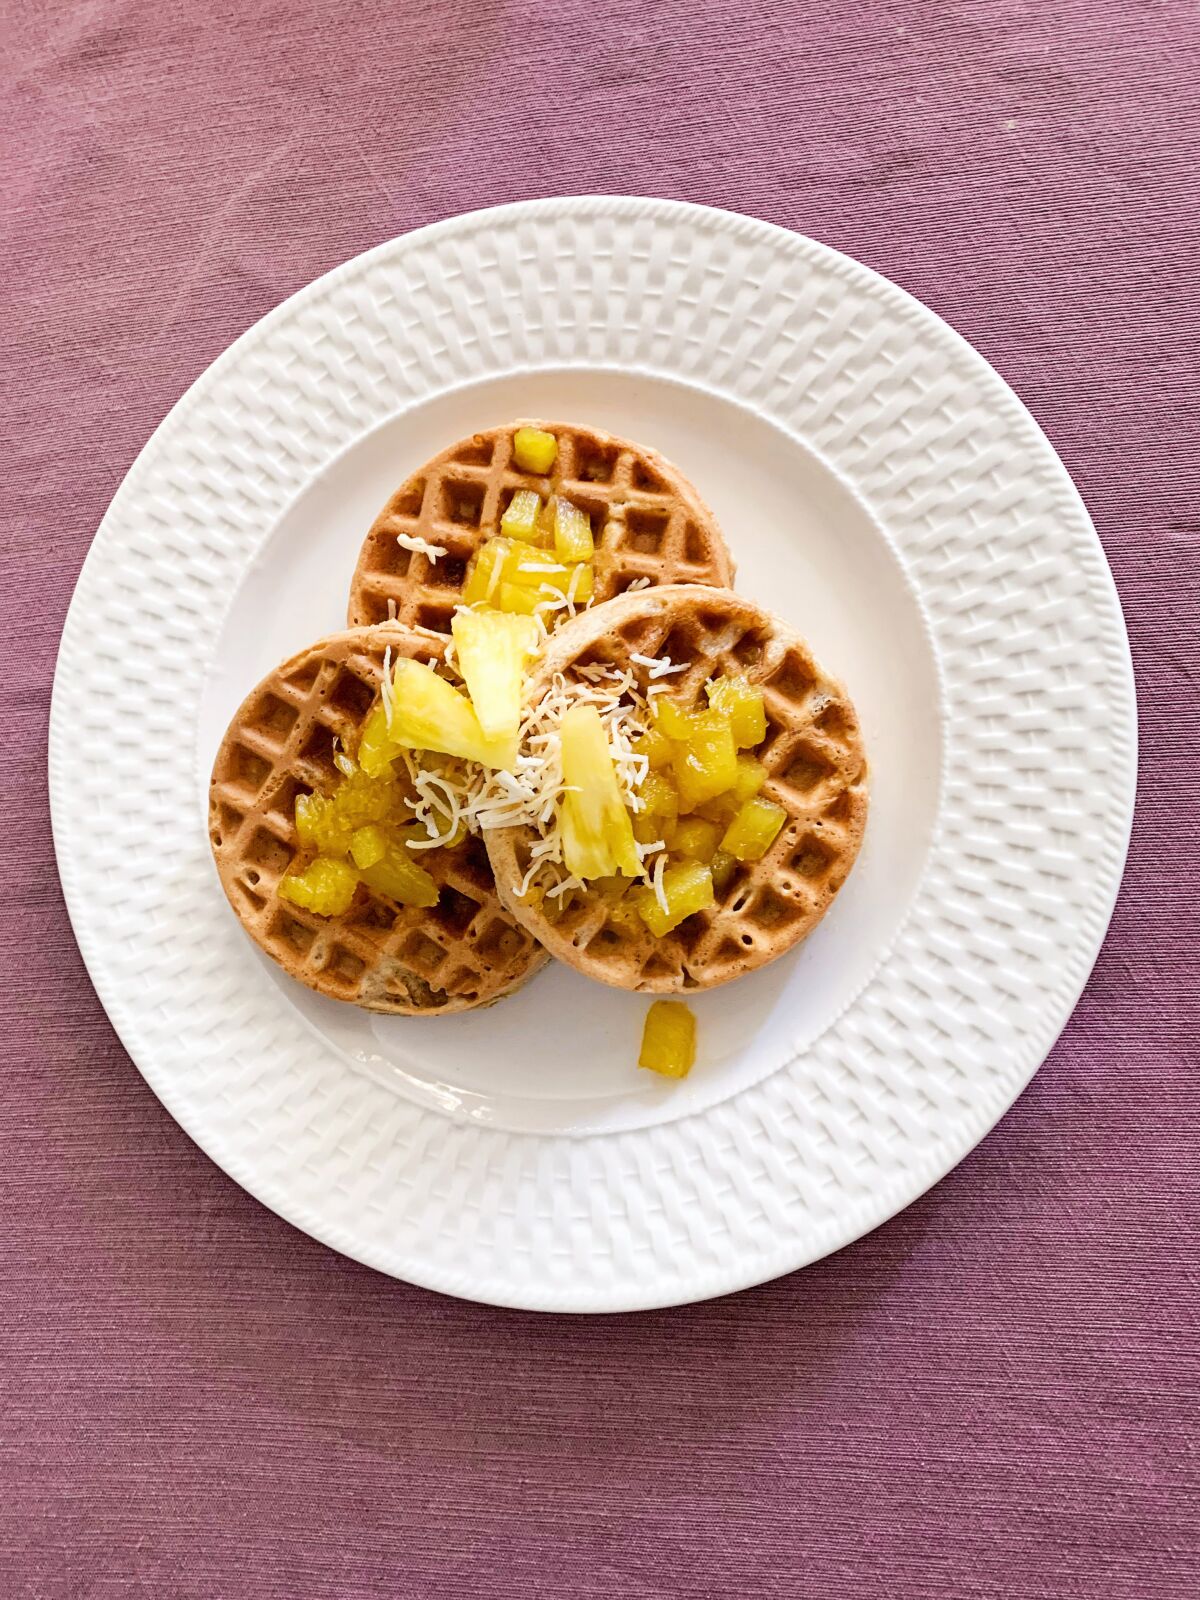 Piña Colada Waffles incorporate pineapple, toasted coconut and hazelnuts, with a topping of pineapple sauce.